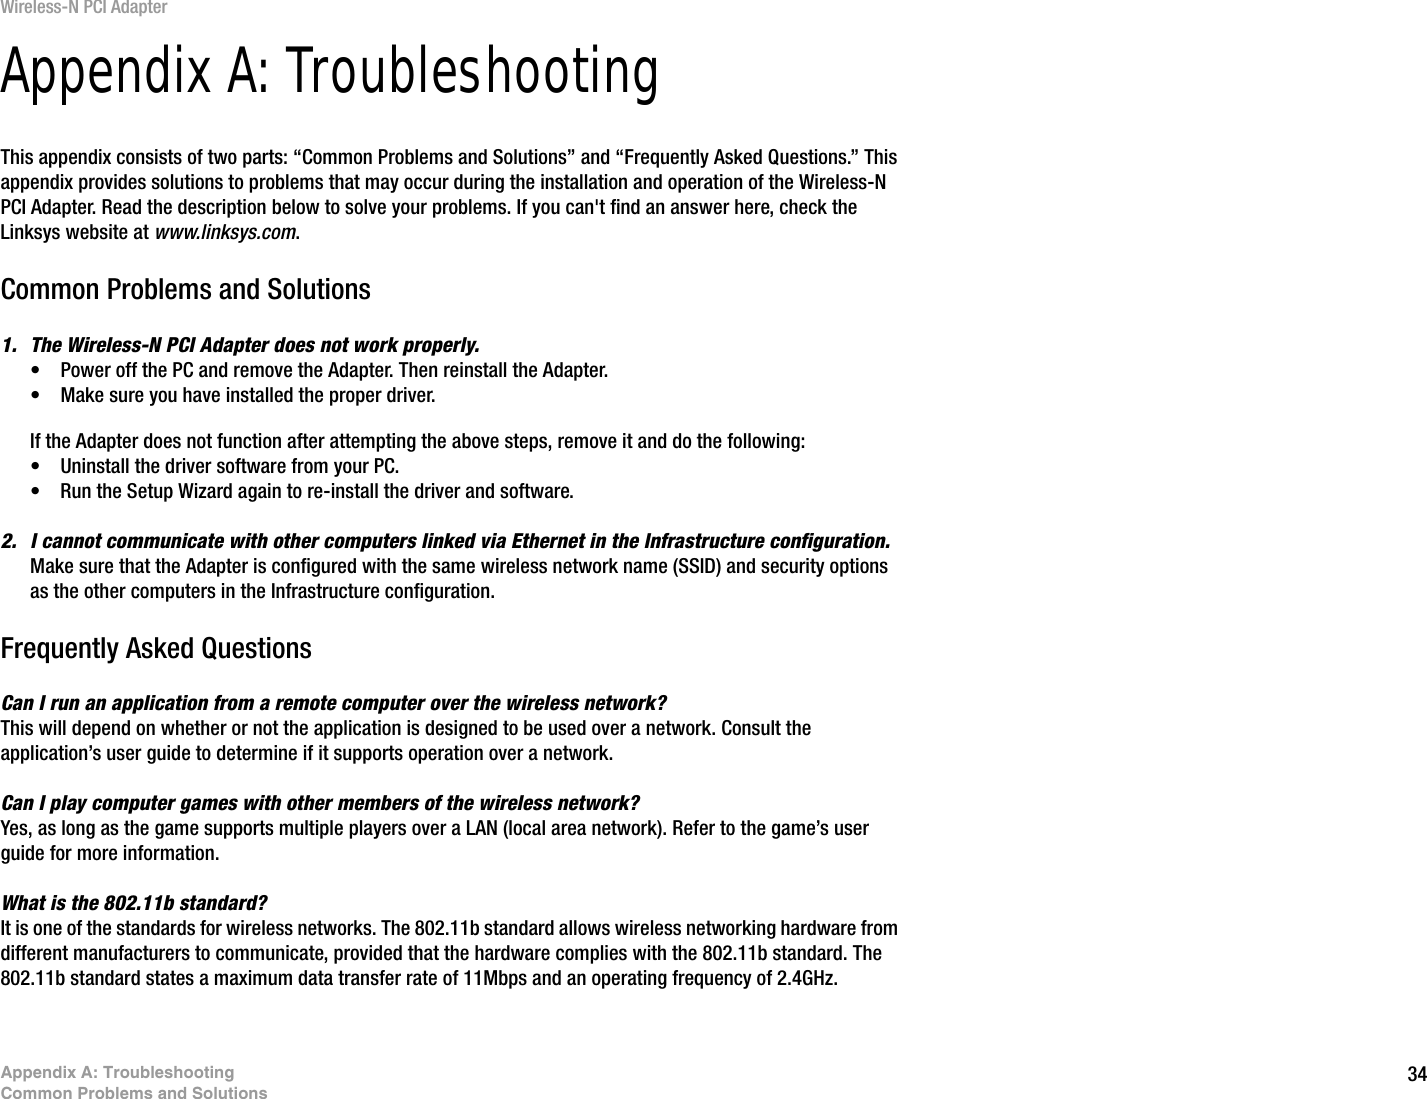 34Appendix A: TroubleshootingCommon Problems and SolutionsWireless-N PCI AdapterAppendix A: TroubleshootingThis appendix consists of two parts: “Common Problems and Solutions” and “Frequently Asked Questions.” This appendix provides solutions to problems that may occur during the installation and operation of the Wireless-N PCI Adapter. Read the description below to solve your problems. If you can&apos;t find an answer here, check the Linksys website at www.linksys.com.Common Problems and Solutions1. The Wireless-N PCI Adapter does not work properly.• Power off the PC and remove the Adapter. Then reinstall the Adapter.• Make sure you have installed the proper driver.If the Adapter does not function after attempting the above steps, remove it and do the following:• Uninstall the driver software from your PC.• Run the Setup Wizard again to re-install the driver and software.2. I cannot communicate with other computers linked via Ethernet in the Infrastructure configuration.Make sure that the Adapter is configured with the same wireless network name (SSID) and security options as the other computers in the Infrastructure configuration.Frequently Asked QuestionsCan I run an application from a remote computer over the wireless network?This will depend on whether or not the application is designed to be used over a network. Consult the application’s user guide to determine if it supports operation over a network.Can I play computer games with other members of the wireless network?Yes, as long as the game supports multiple players over a LAN (local area network). Refer to the game’s user guide for more information.What is the 802.11b standard?It is one of the standards for wireless networks. The 802.11b standard allows wireless networking hardware from different manufacturers to communicate, provided that the hardware complies with the 802.11b standard. The 802.11b standard states a maximum data transfer rate of 11Mbps and an operating frequency of 2.4GHz.